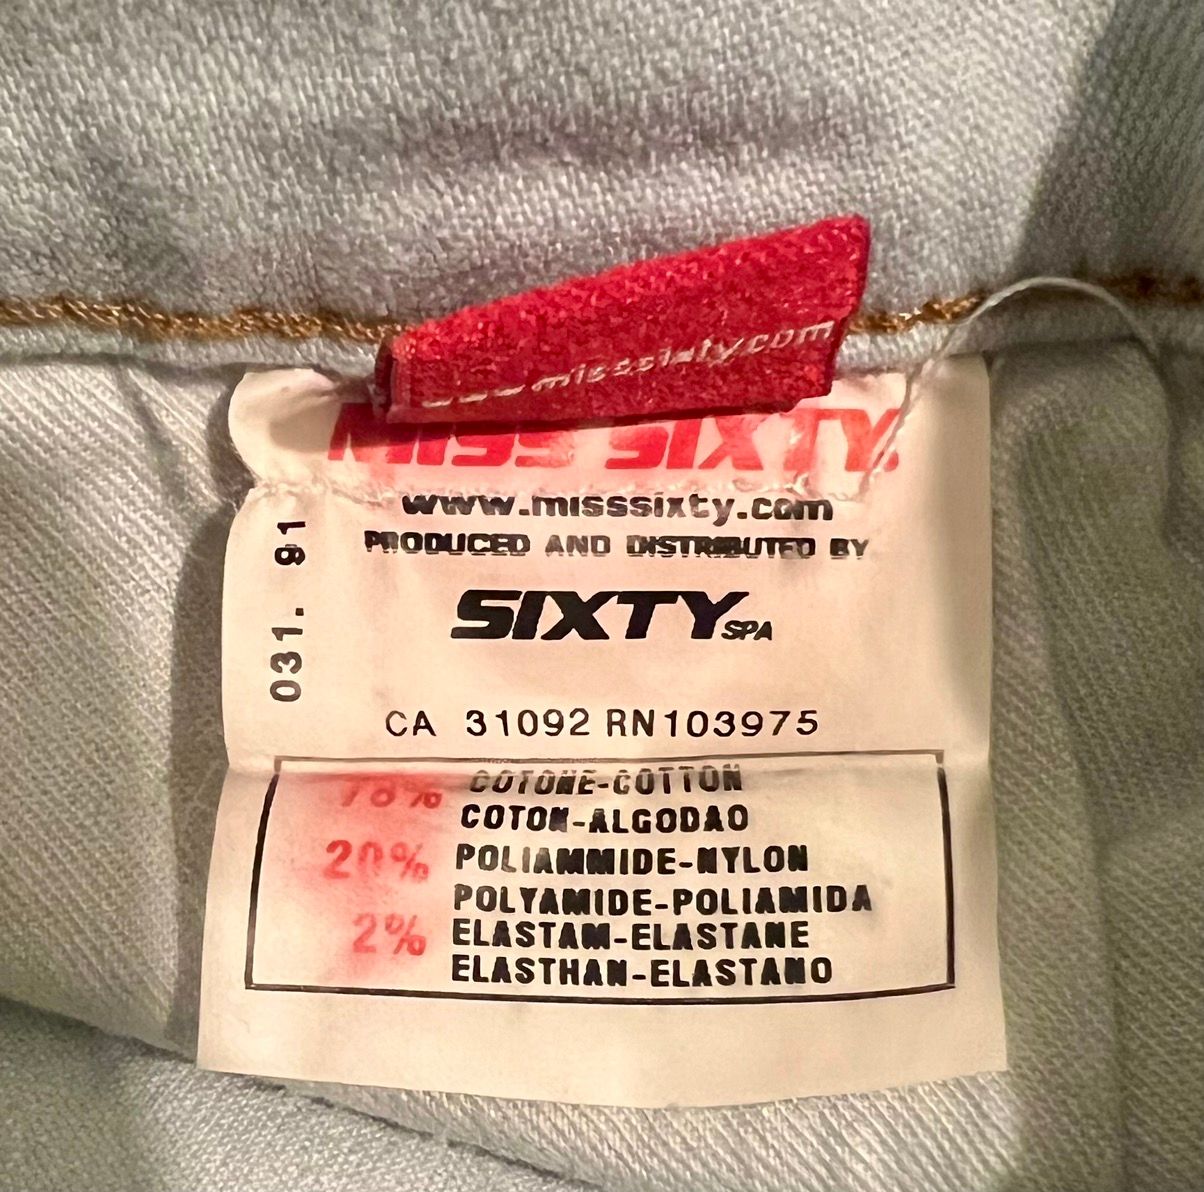 Designer Authentic Miss Sixty Made In Italy Jeans 30 Light Wash Denim Size 30" / US 8 / IT 44 - 6 Preview